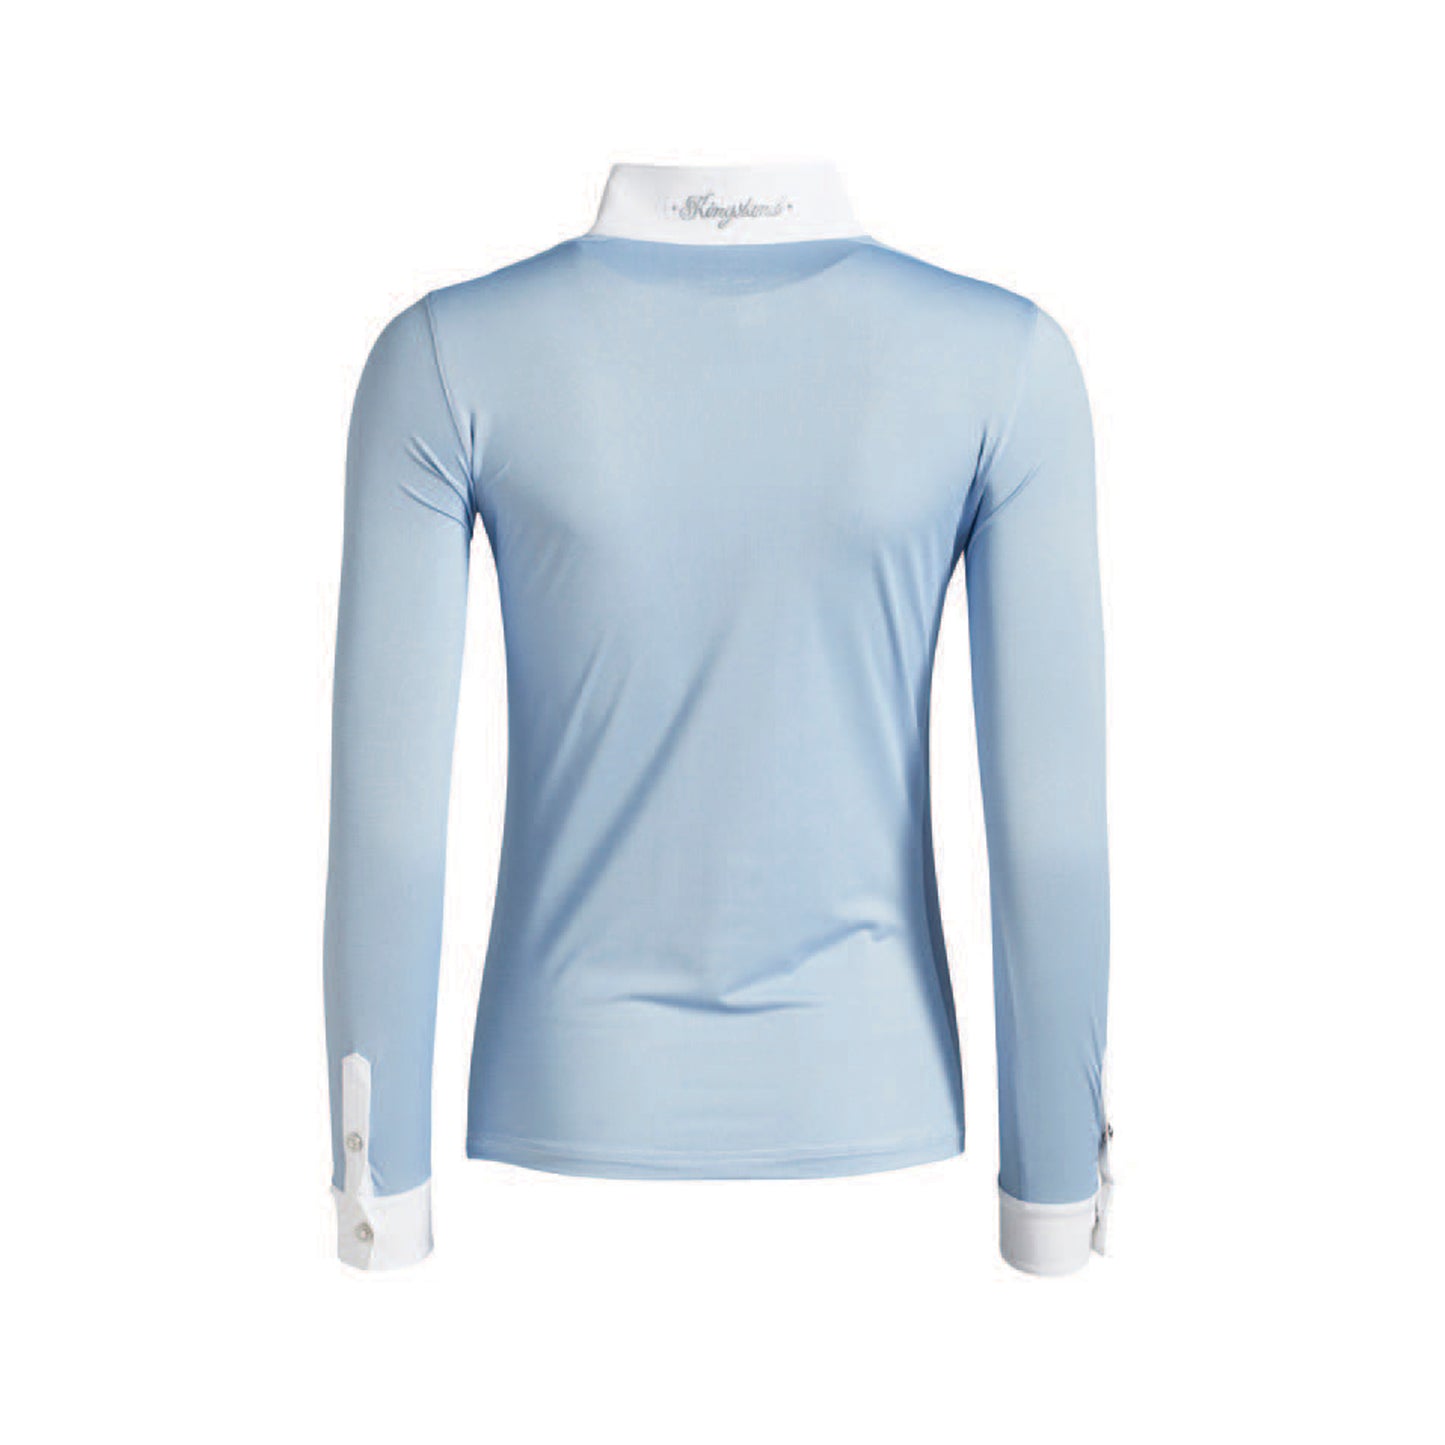 KLpace Ladies Long Sleeve Show Shirt